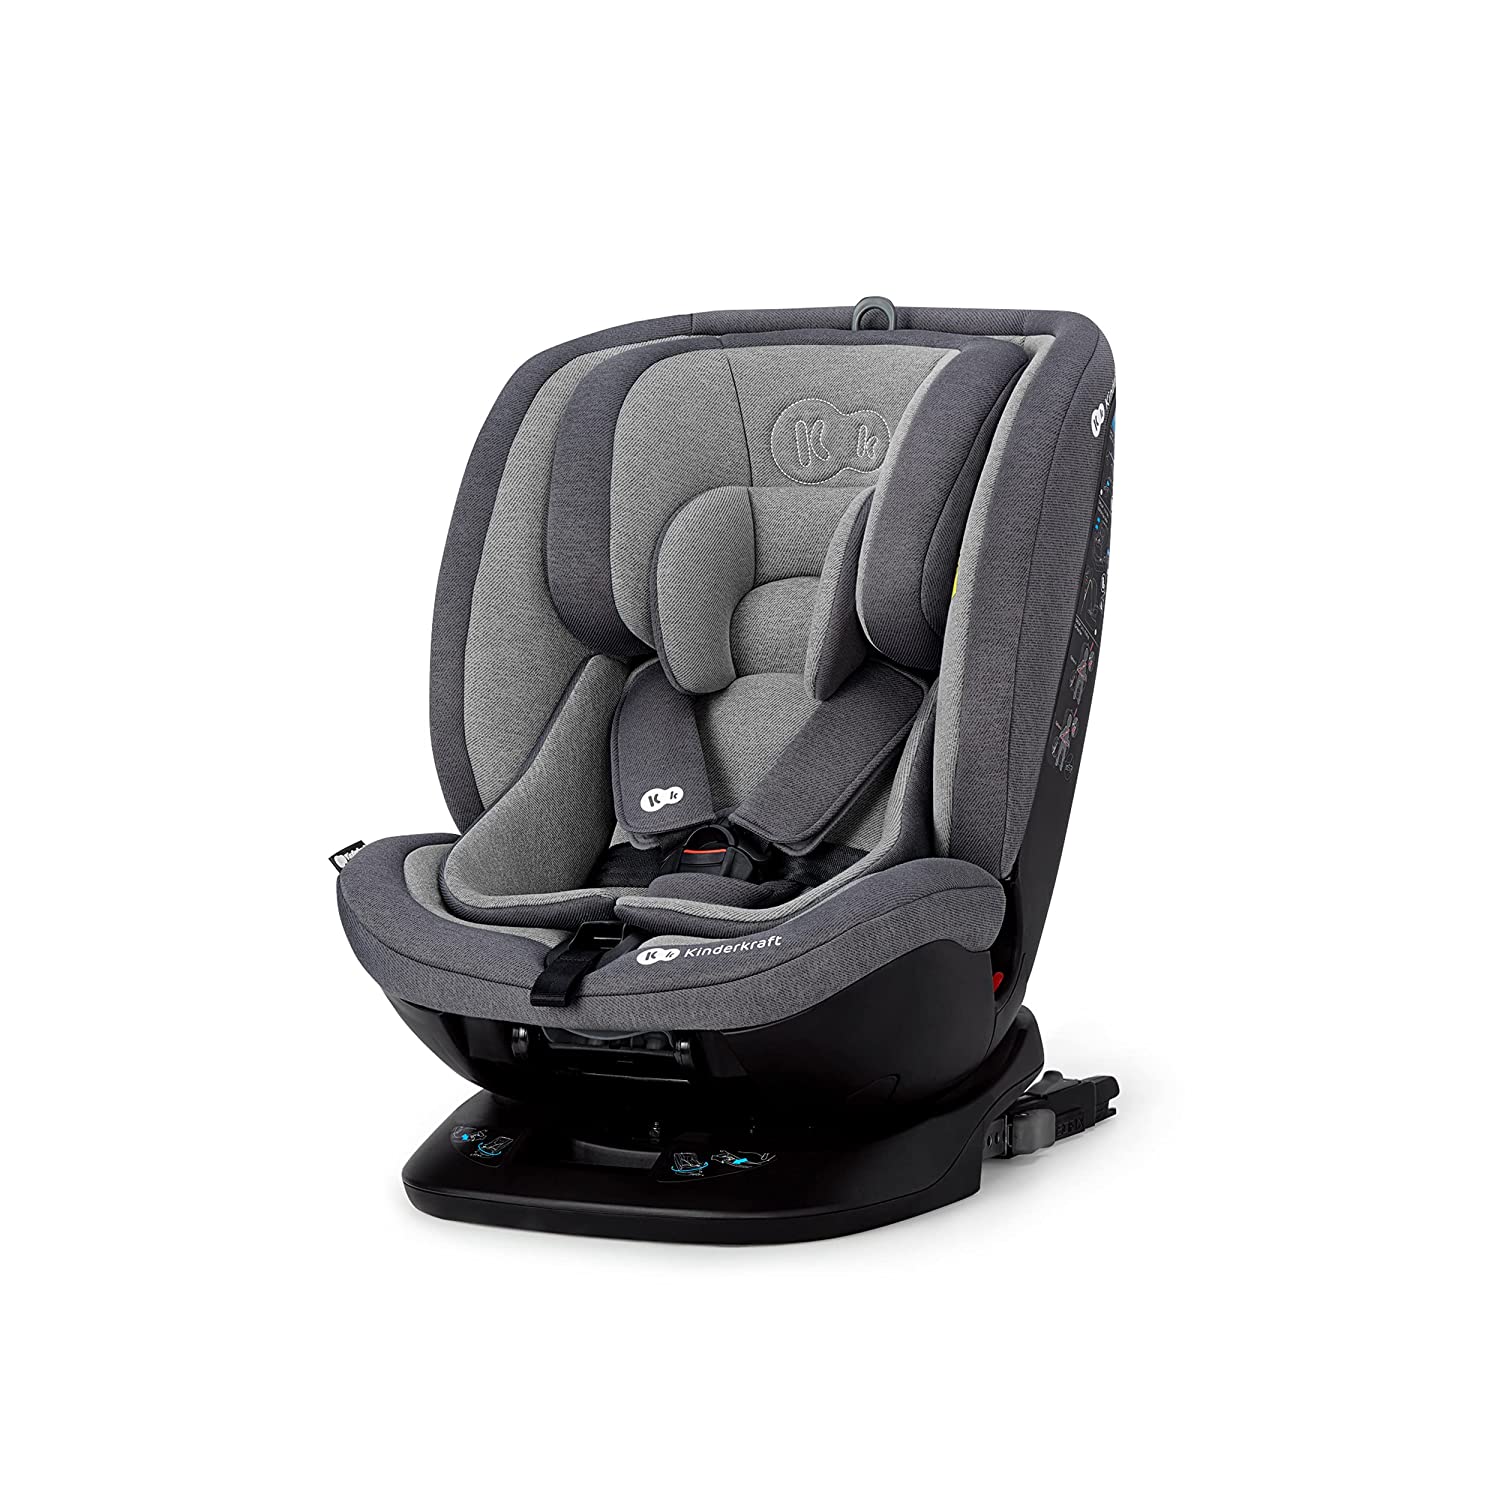 kk Kinderkraft Kinderkraft XPEdition Child Car Seat with 360 Degree Rotation, Isofix, Base Station, Special Safety Systems, Adjustable Headrest, from Birth Group 0/1/2/3 0-36 kg, Grey